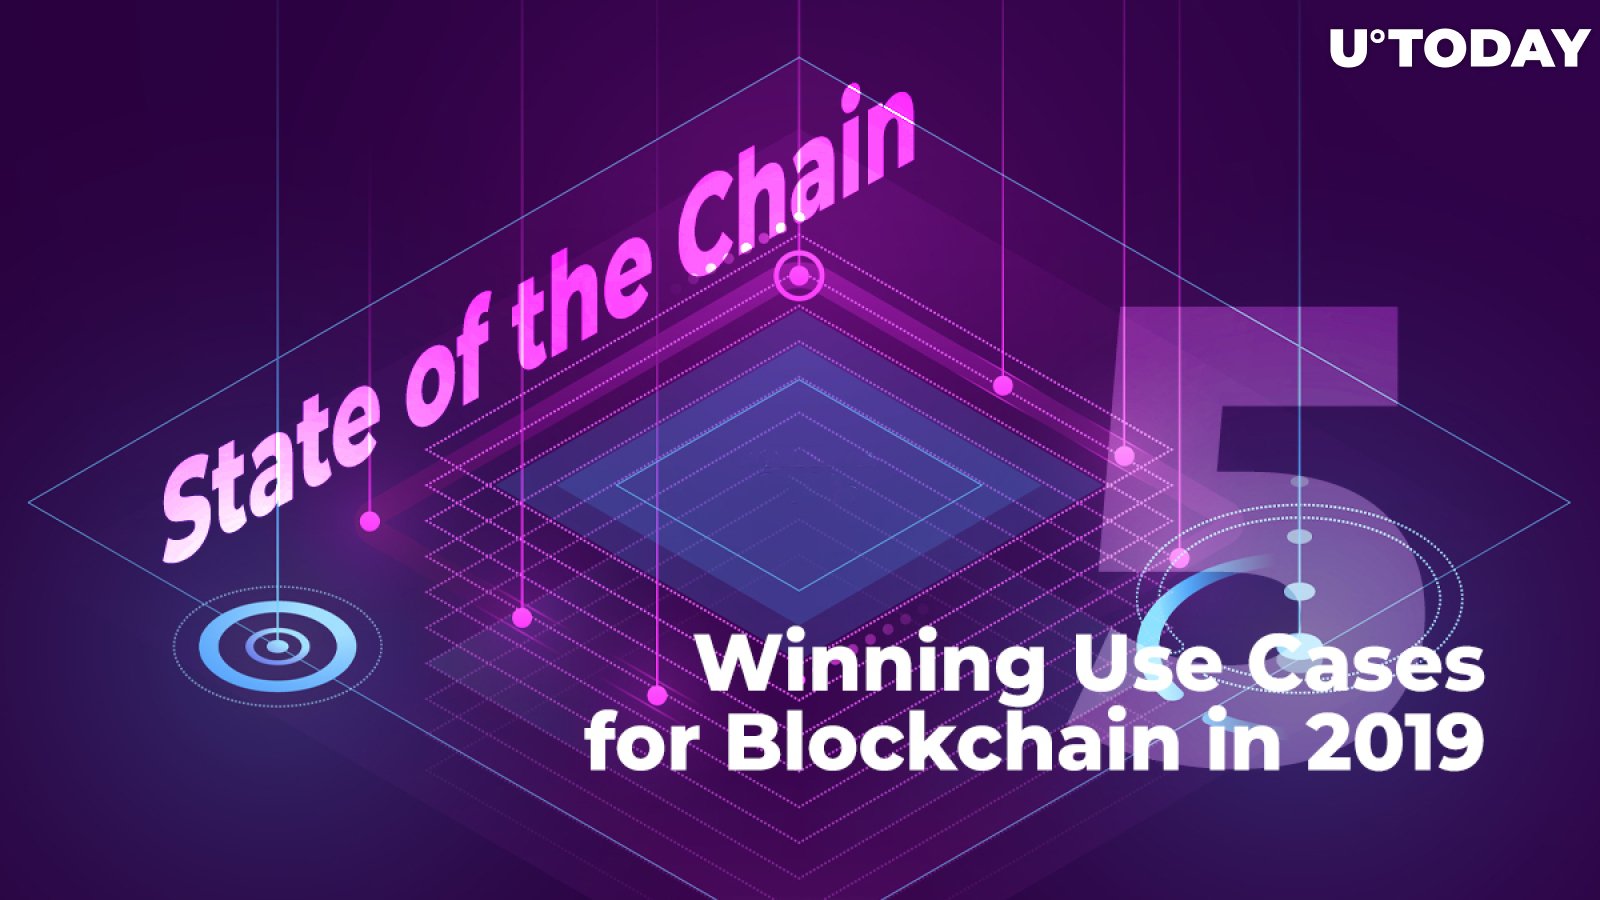 State of the Chain: Five Winning Use Cases for Blockchain in 2019